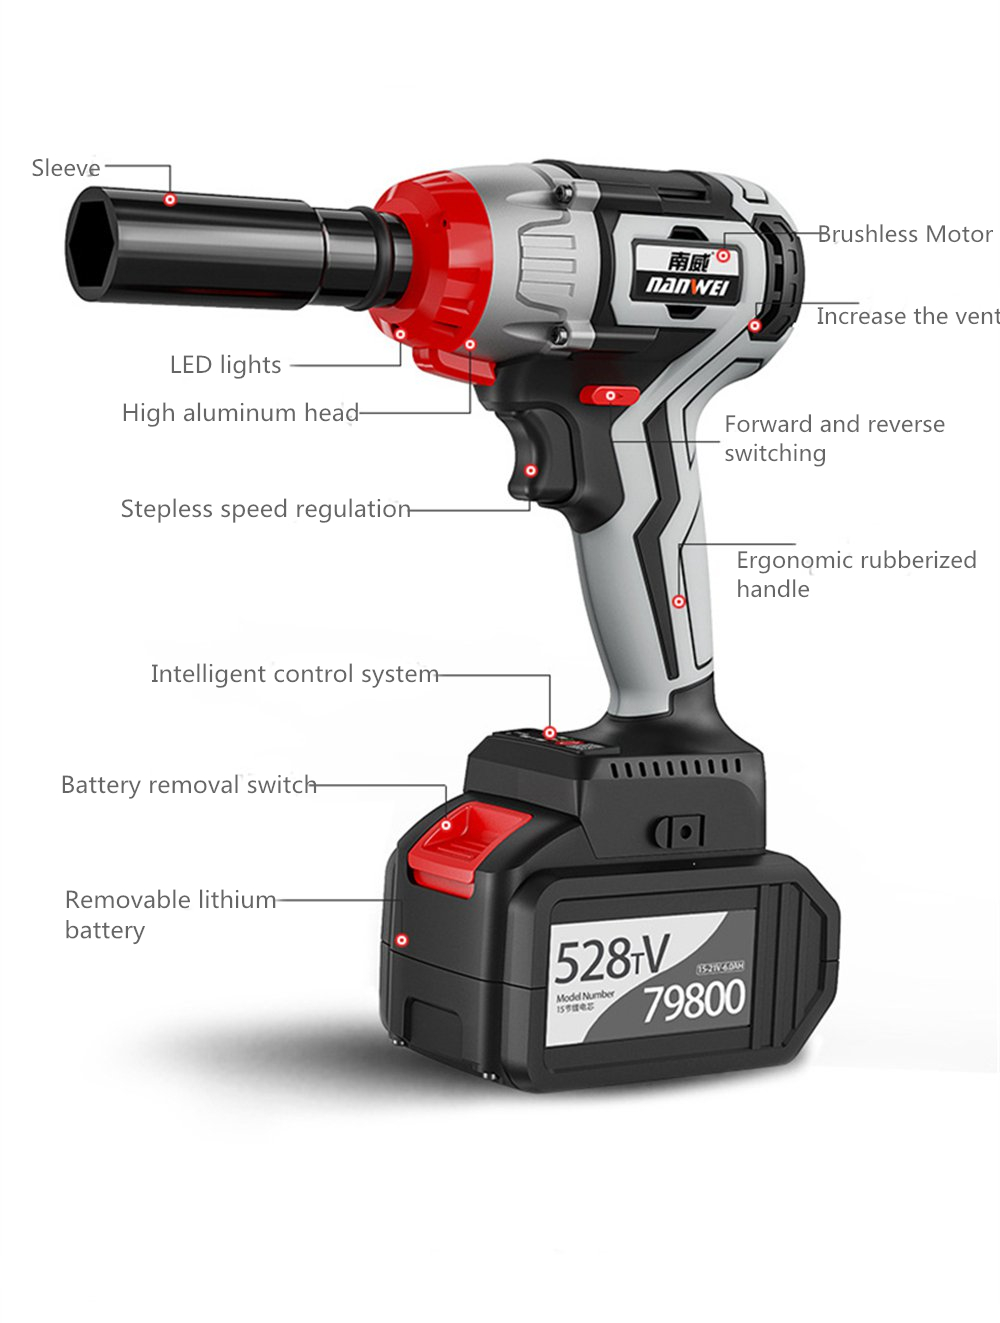 NANWEI-380NM-Brushless-Electric-Impact-Wrench-Adjustable-Speed-Regulation-With-60Ah-Lithium-Battery--1750113-8